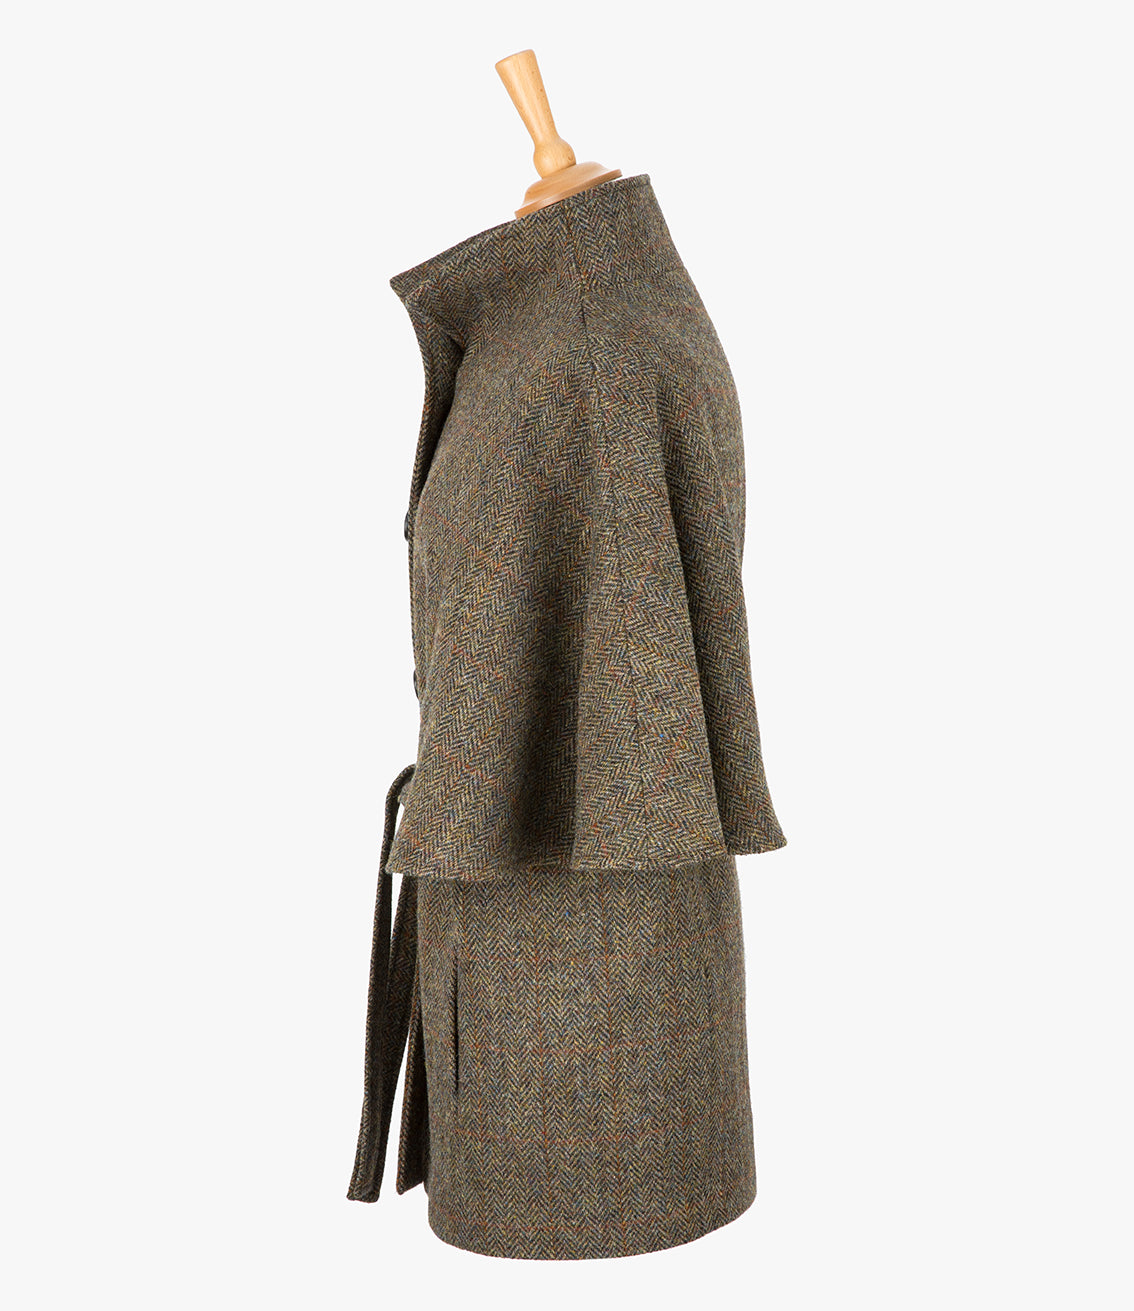 This is the side view of the belted cape in Brown herringbone. You can see the collar stood up and the sleeves of the cape which come mid-way down the arm. It has two pockets and ties at the waist for a neat silhouette.